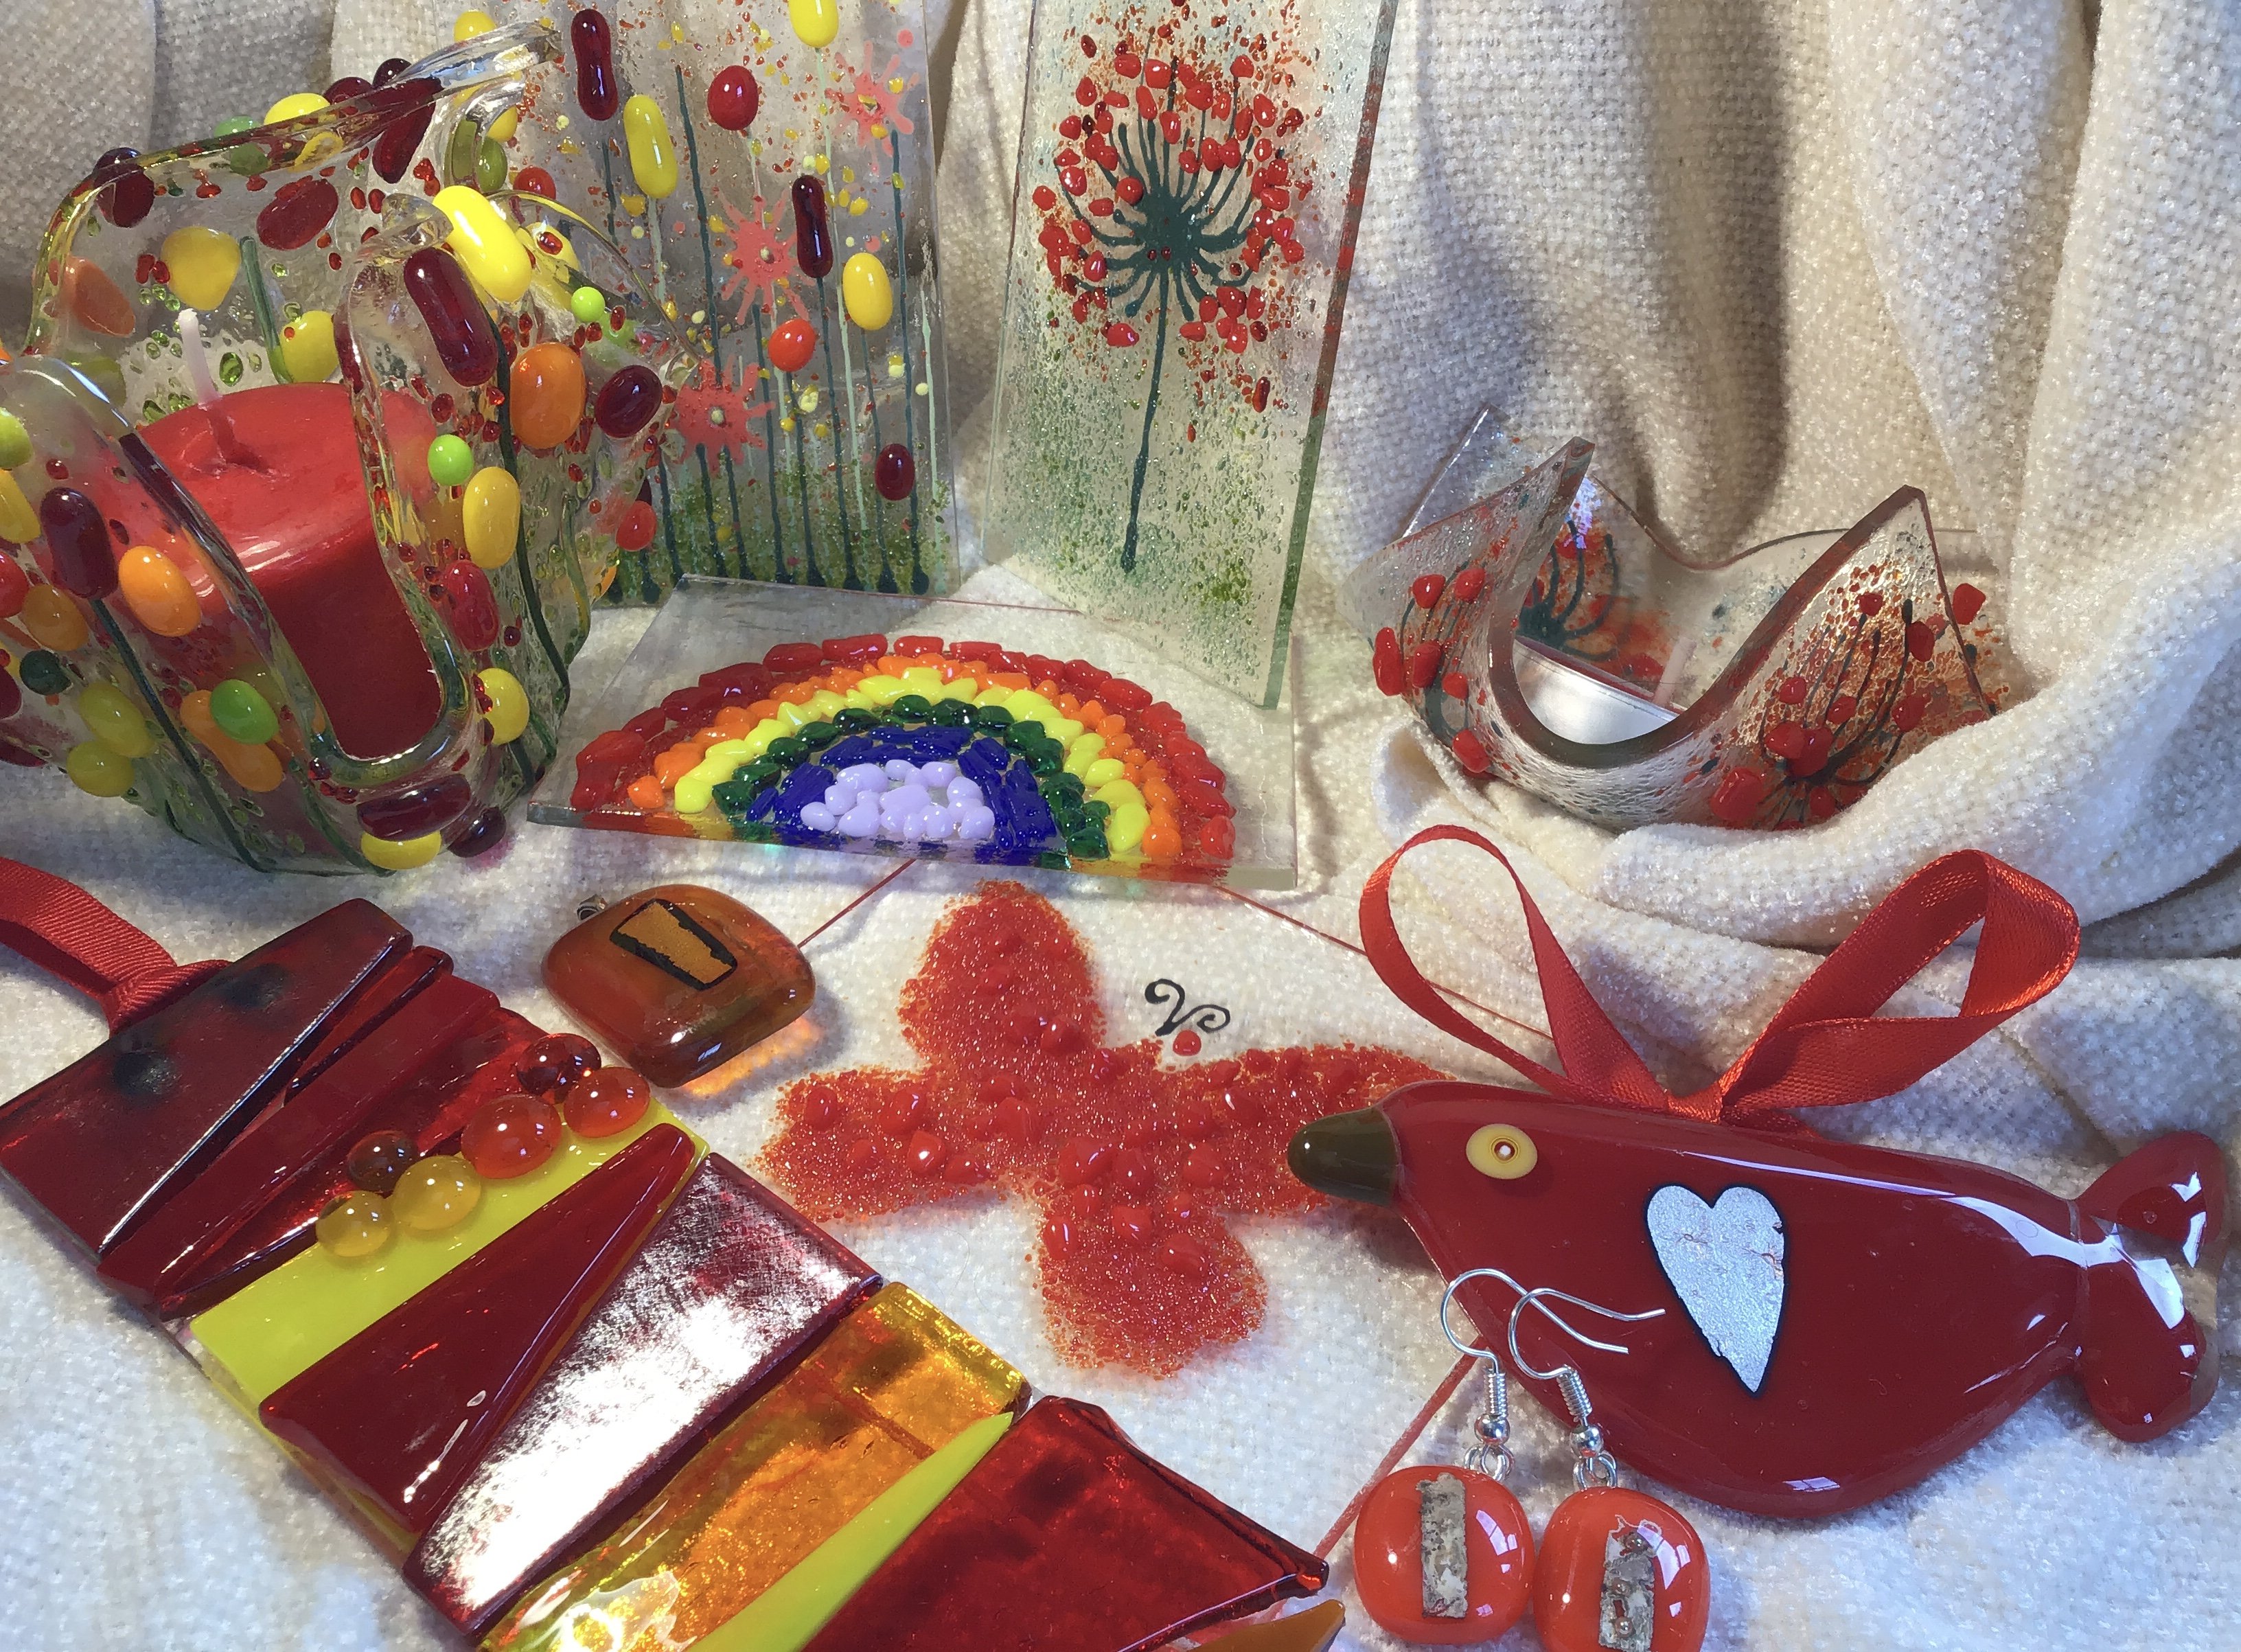 Fused glass creations at The Butterfly Effect Studio in Warwickshire